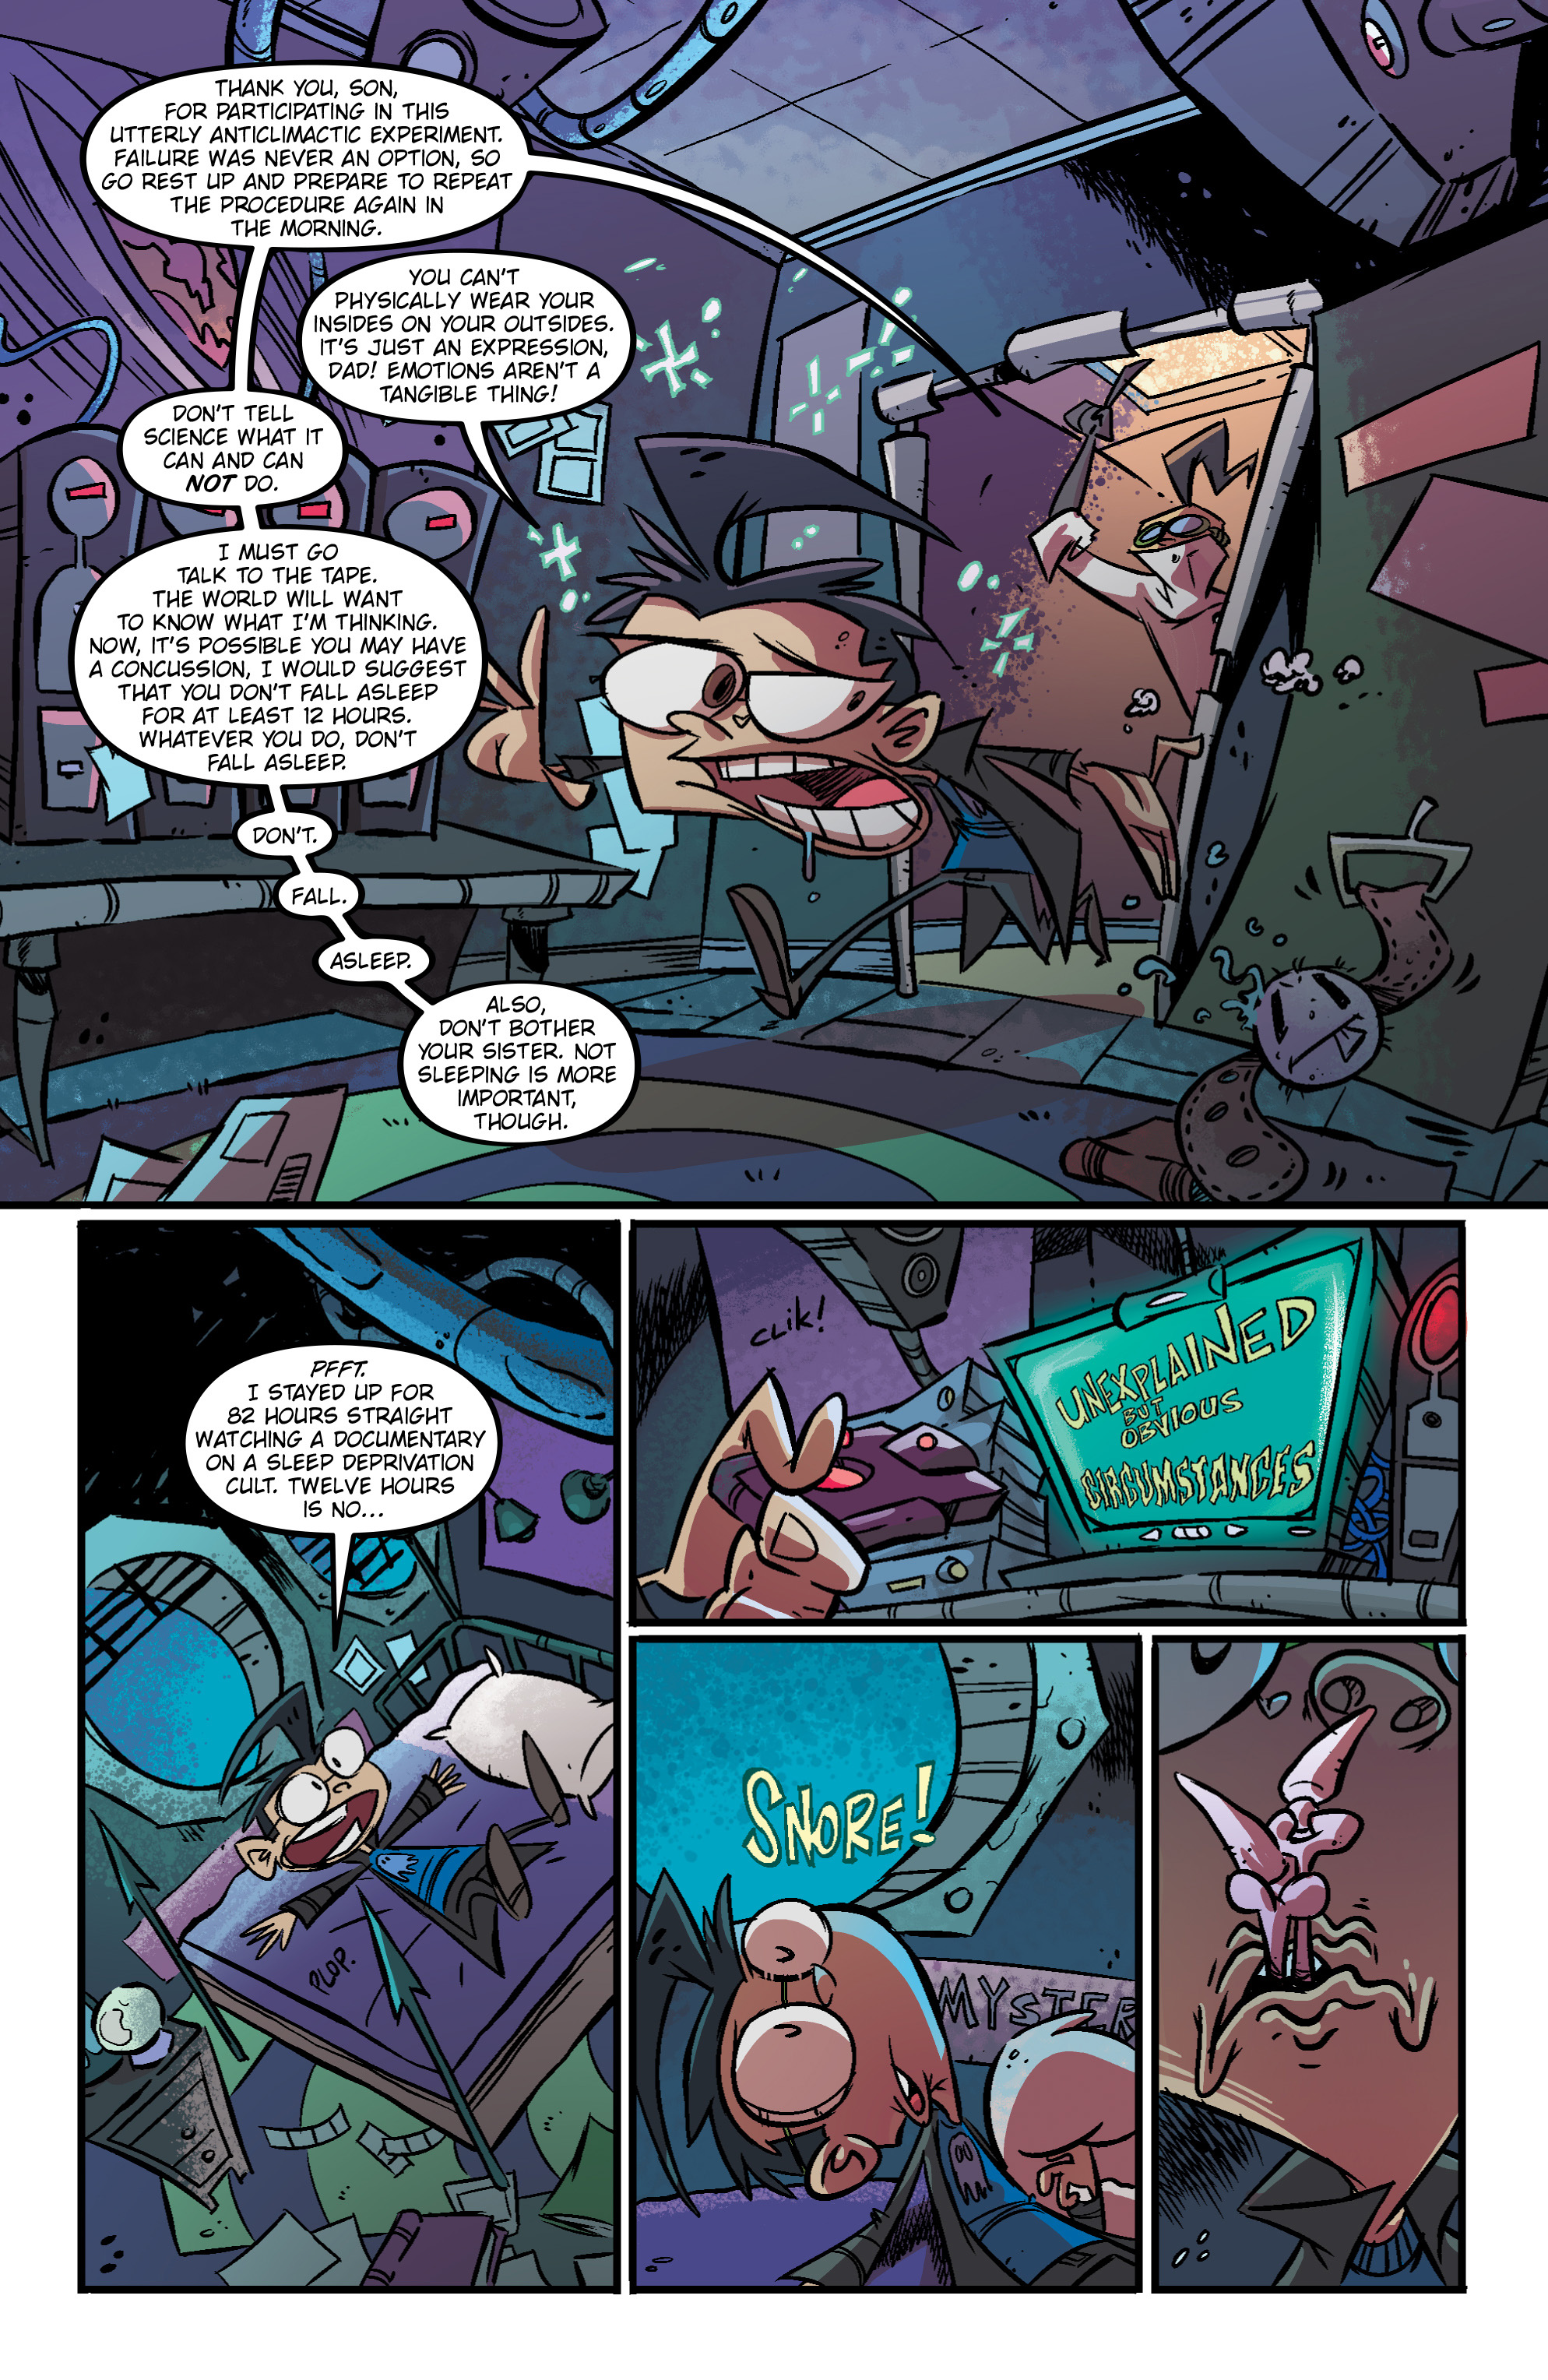 Invader Zim (2015-): Chapter 41 - Page 4